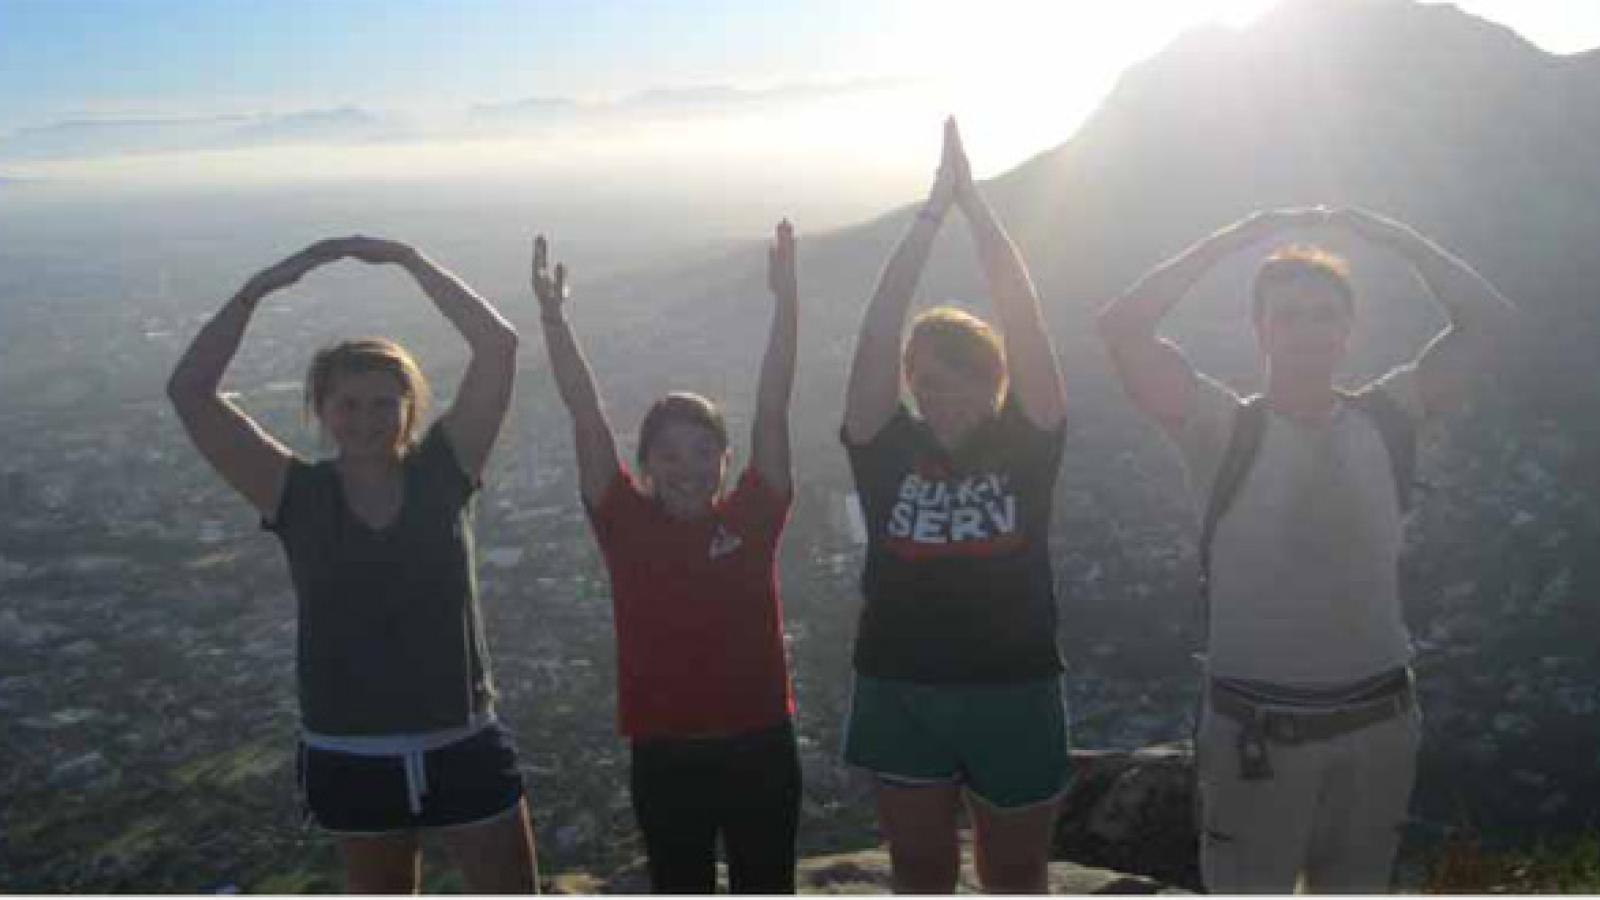 Students signing O-H-I-O in South Africa.